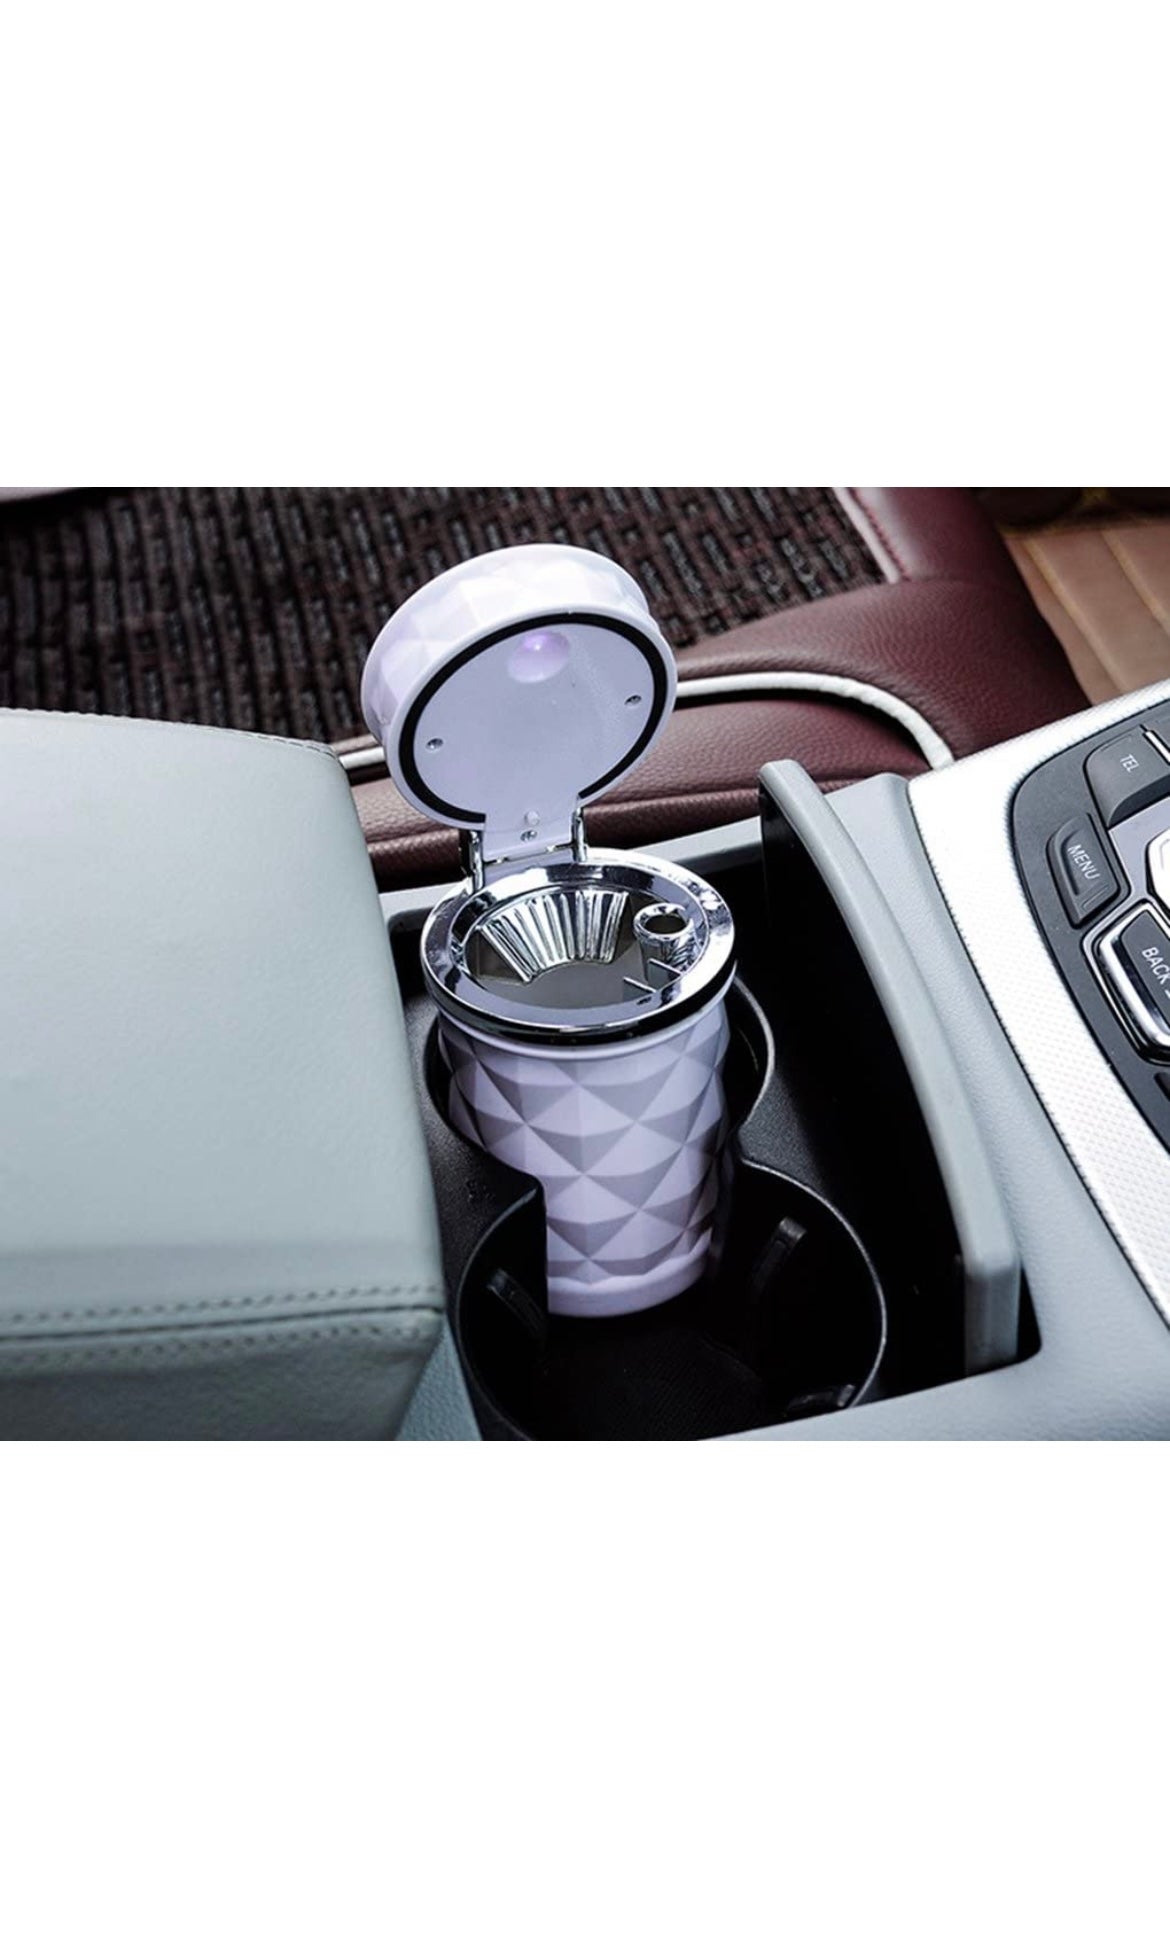 Car Ashtray Portable Smoke Cup Holder Home Cigarette Ash Tray with Colorful  LED Light,Ideal for Truck Office Auto